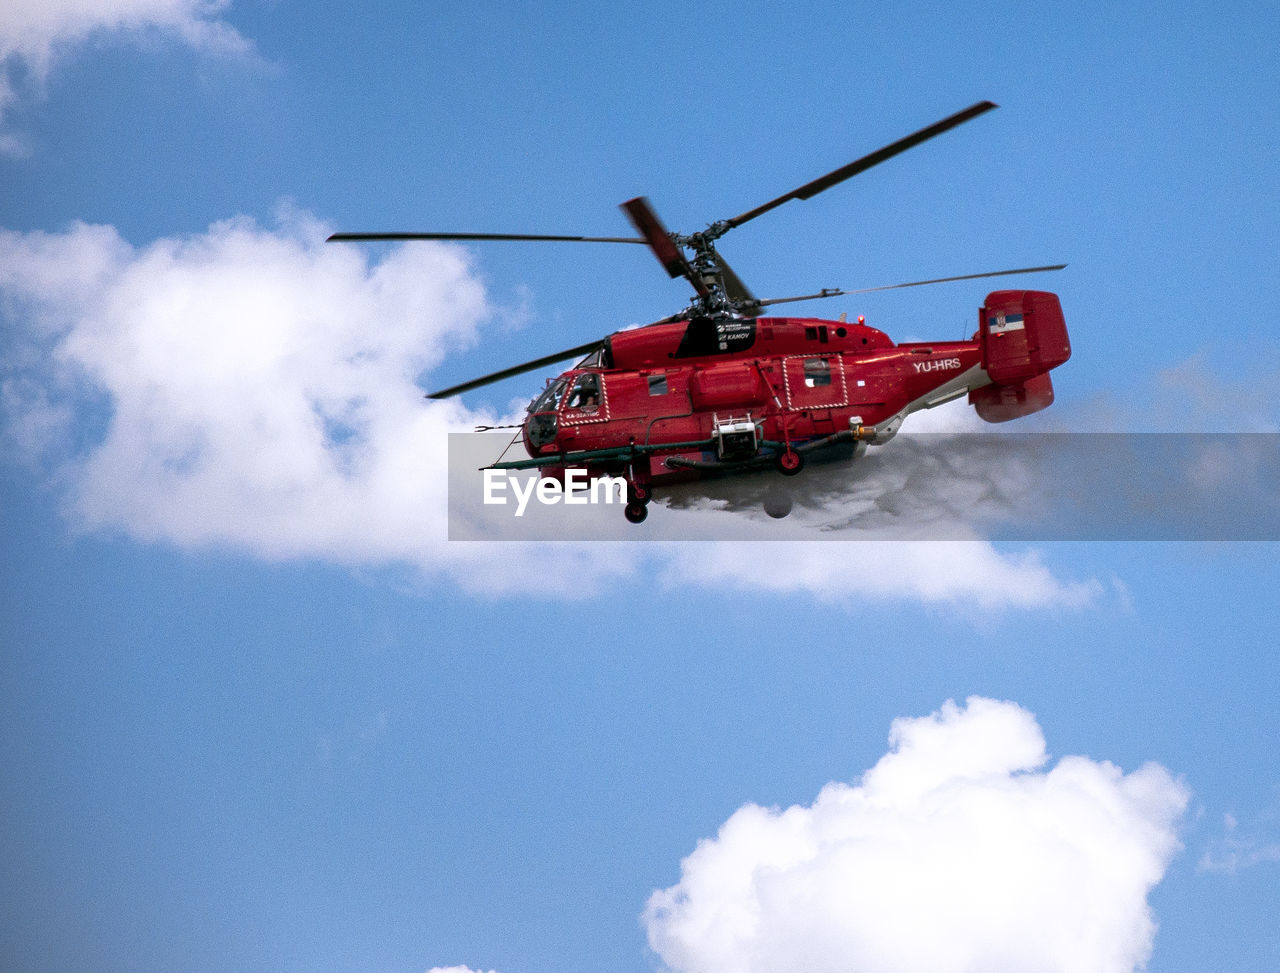 helicopter, air vehicle, transportation, flying, sky, mode of transportation, rotorcraft, cloud, vehicle, airplane, helicopter rotor, aircraft, nature, aviation, motion, military helicopter, propeller, on the move, mid-air, accidents and disasters, firefighter, rescue, blue, red, emergency services occupation, air force, coast guard, military, outdoors, day, hovering